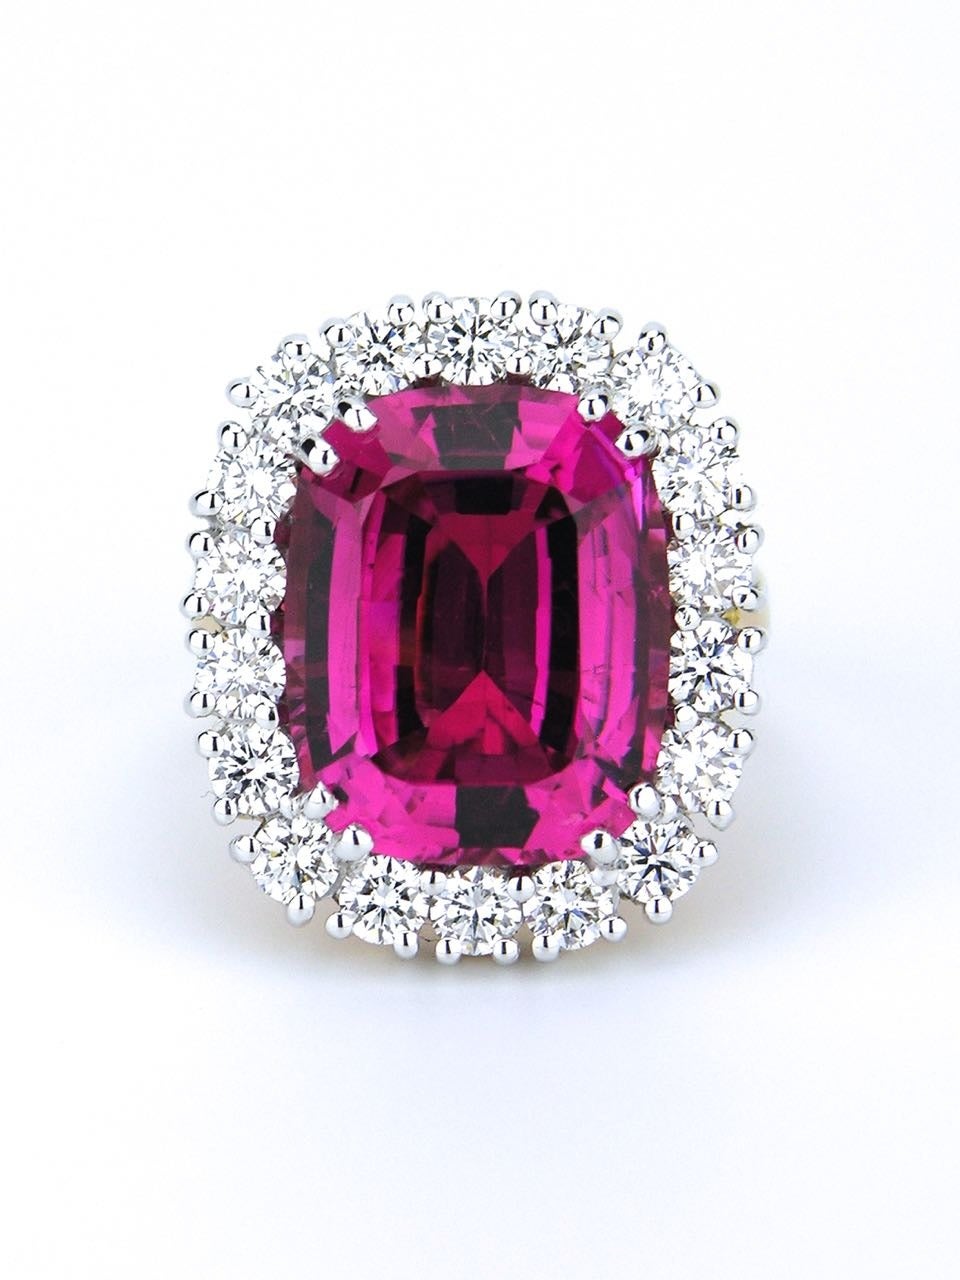 Australian Shocking Pink Cushion Cut Tourmaline Diamond Gold Cluster Ring In Excellent Condition In Potts Point, New South Wales